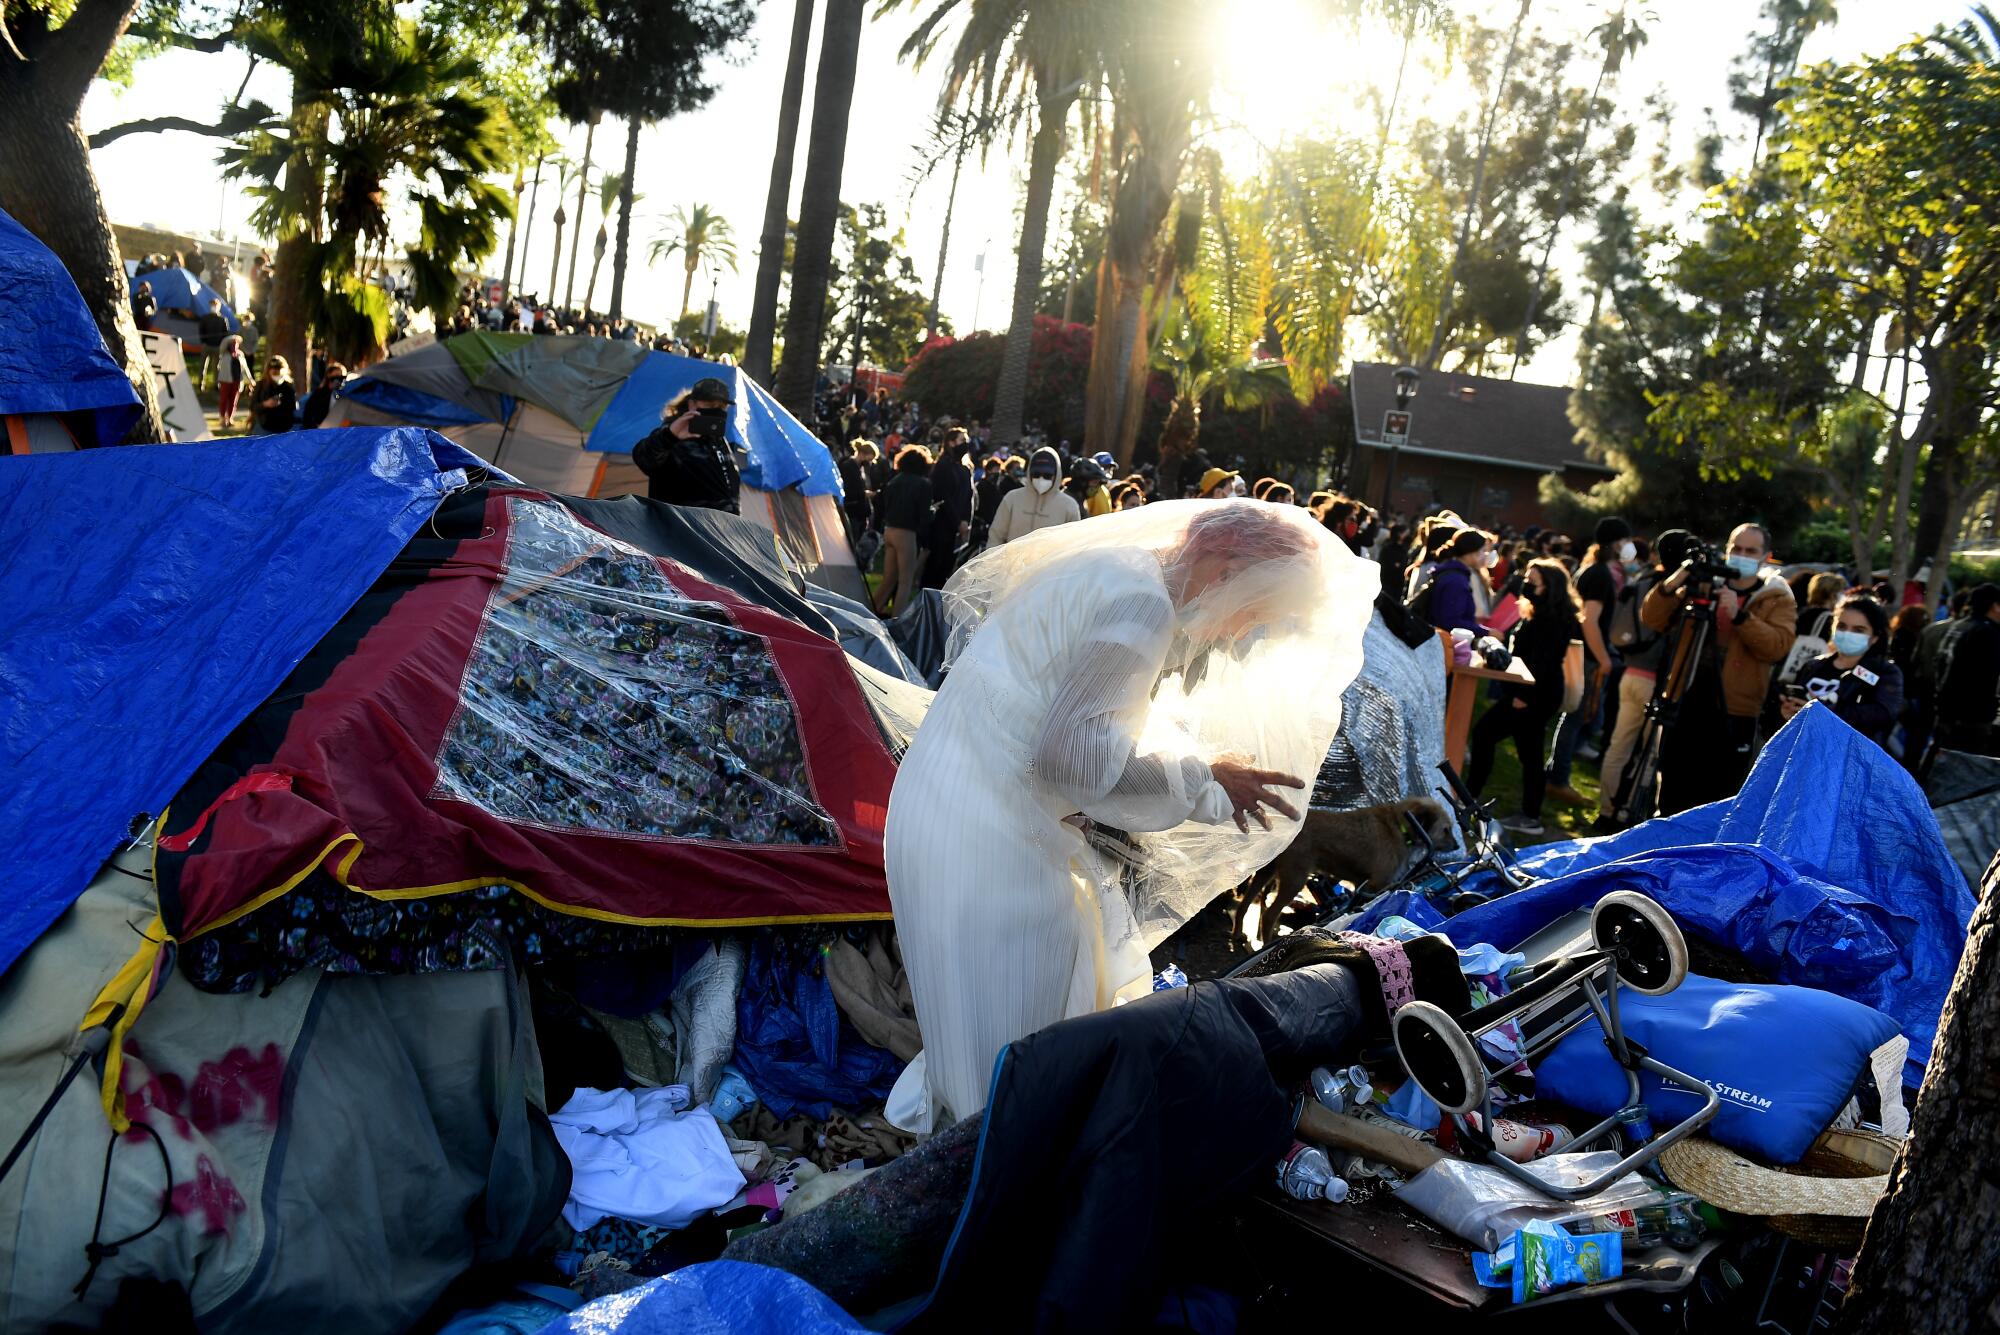 A person wears a wedding gown at a rally in Echo Park.